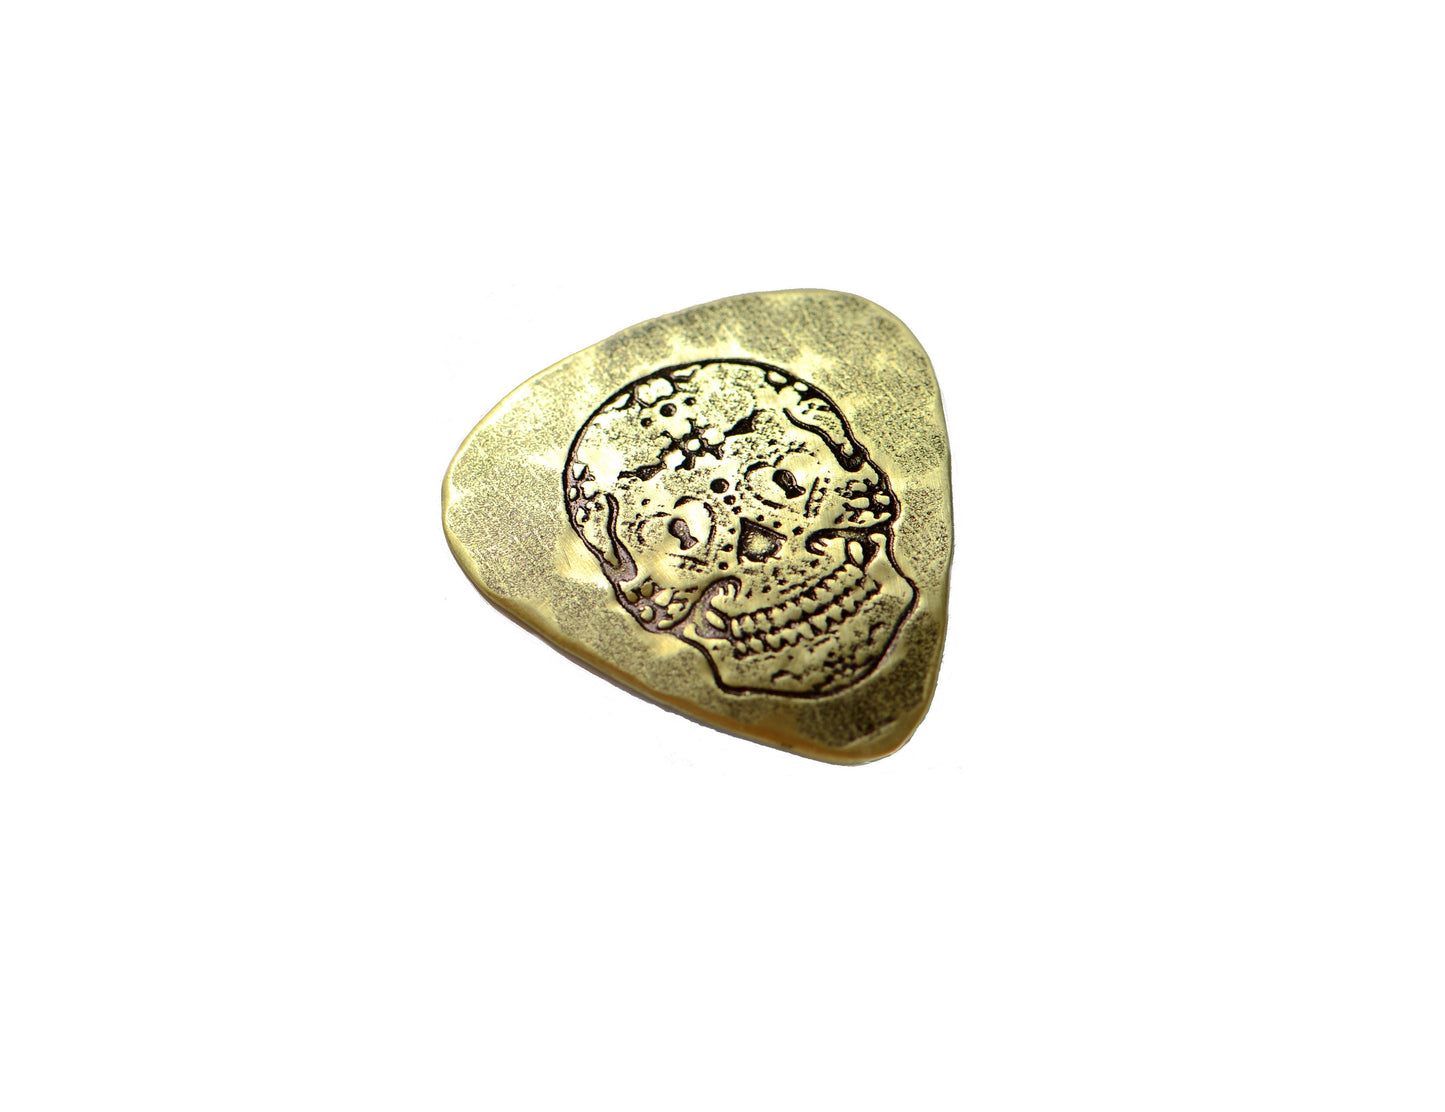 Playable brass guitar pick with sugar skull